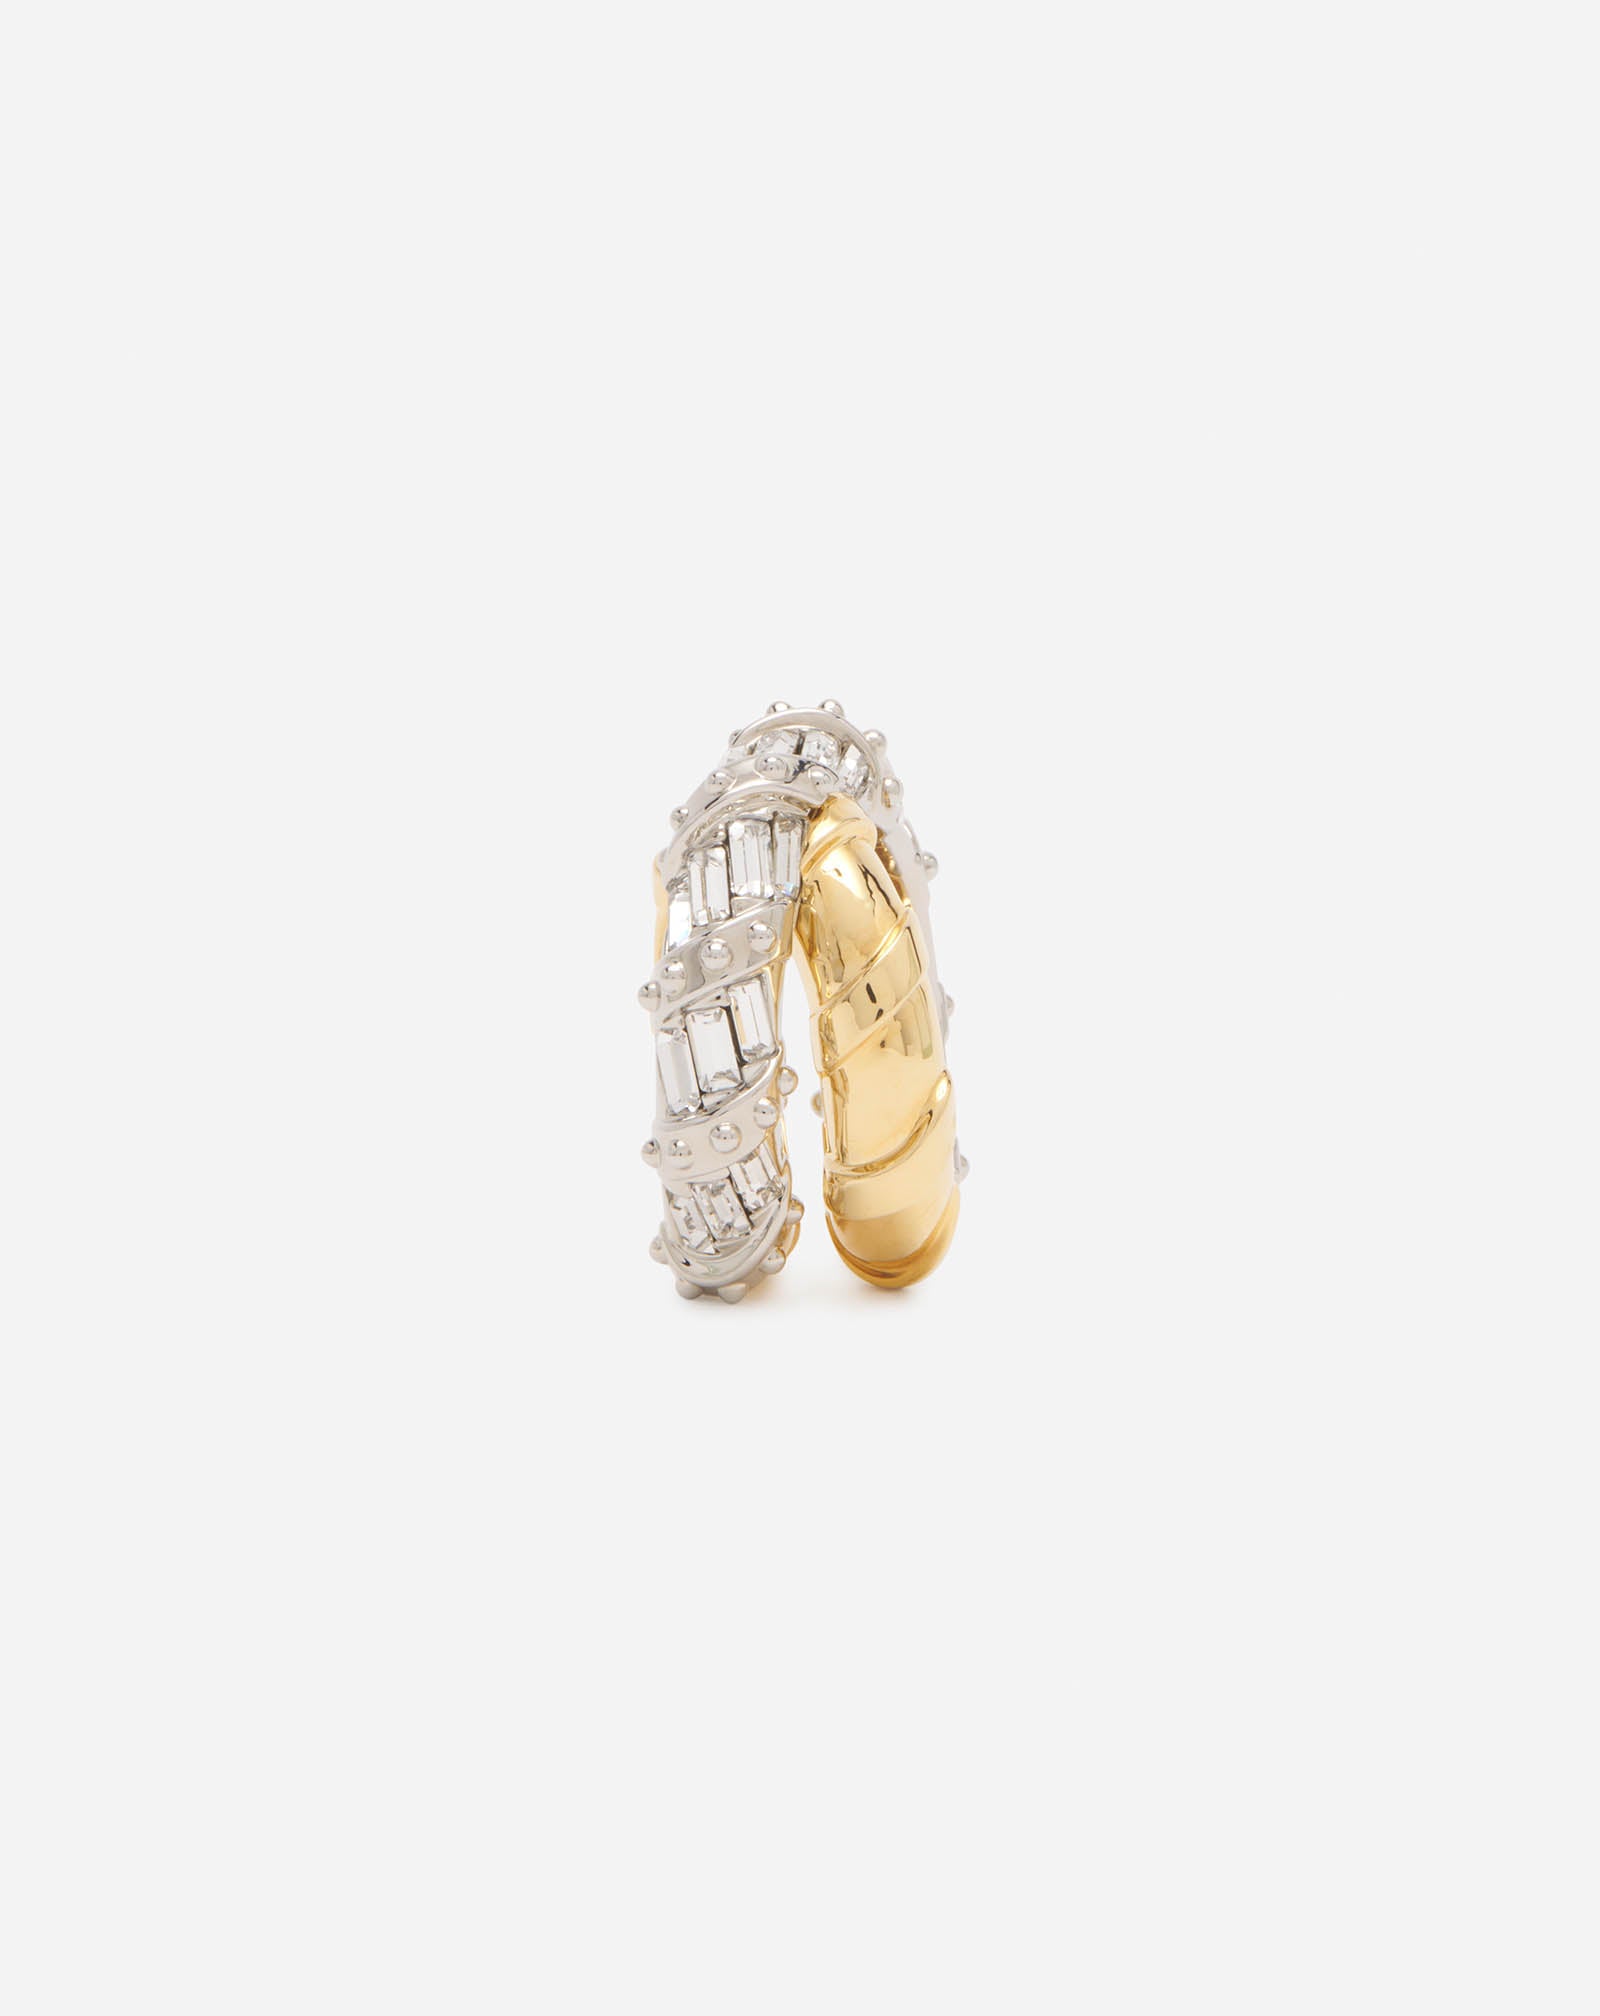 BAGUETTES MELODIE RING